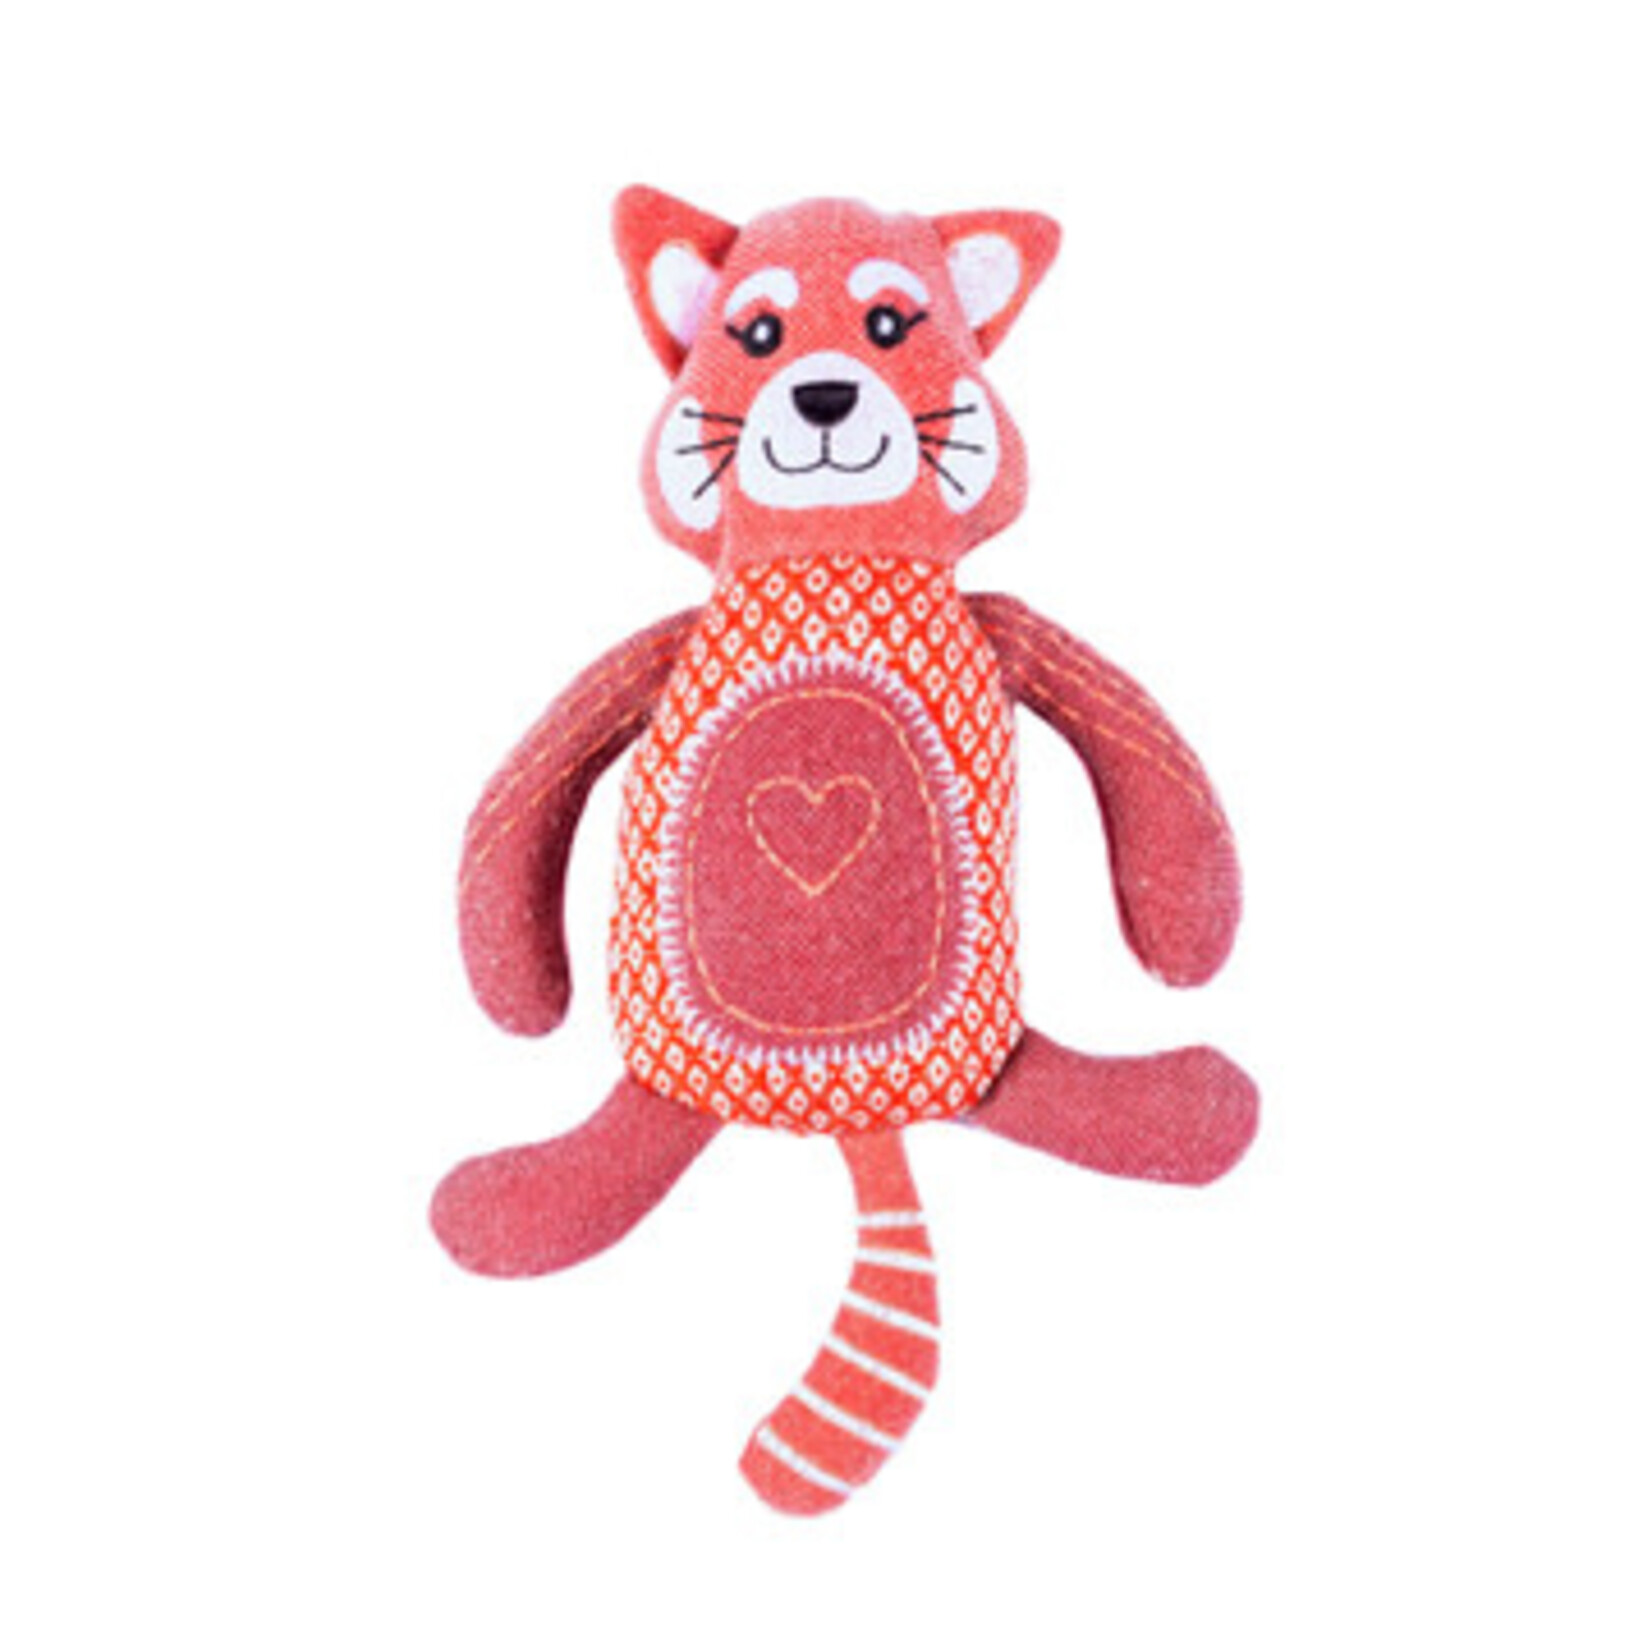 Resploot Toy Resploot Toy – Red Panda – China - 32 x 25 cm (12.5 x 10 in)